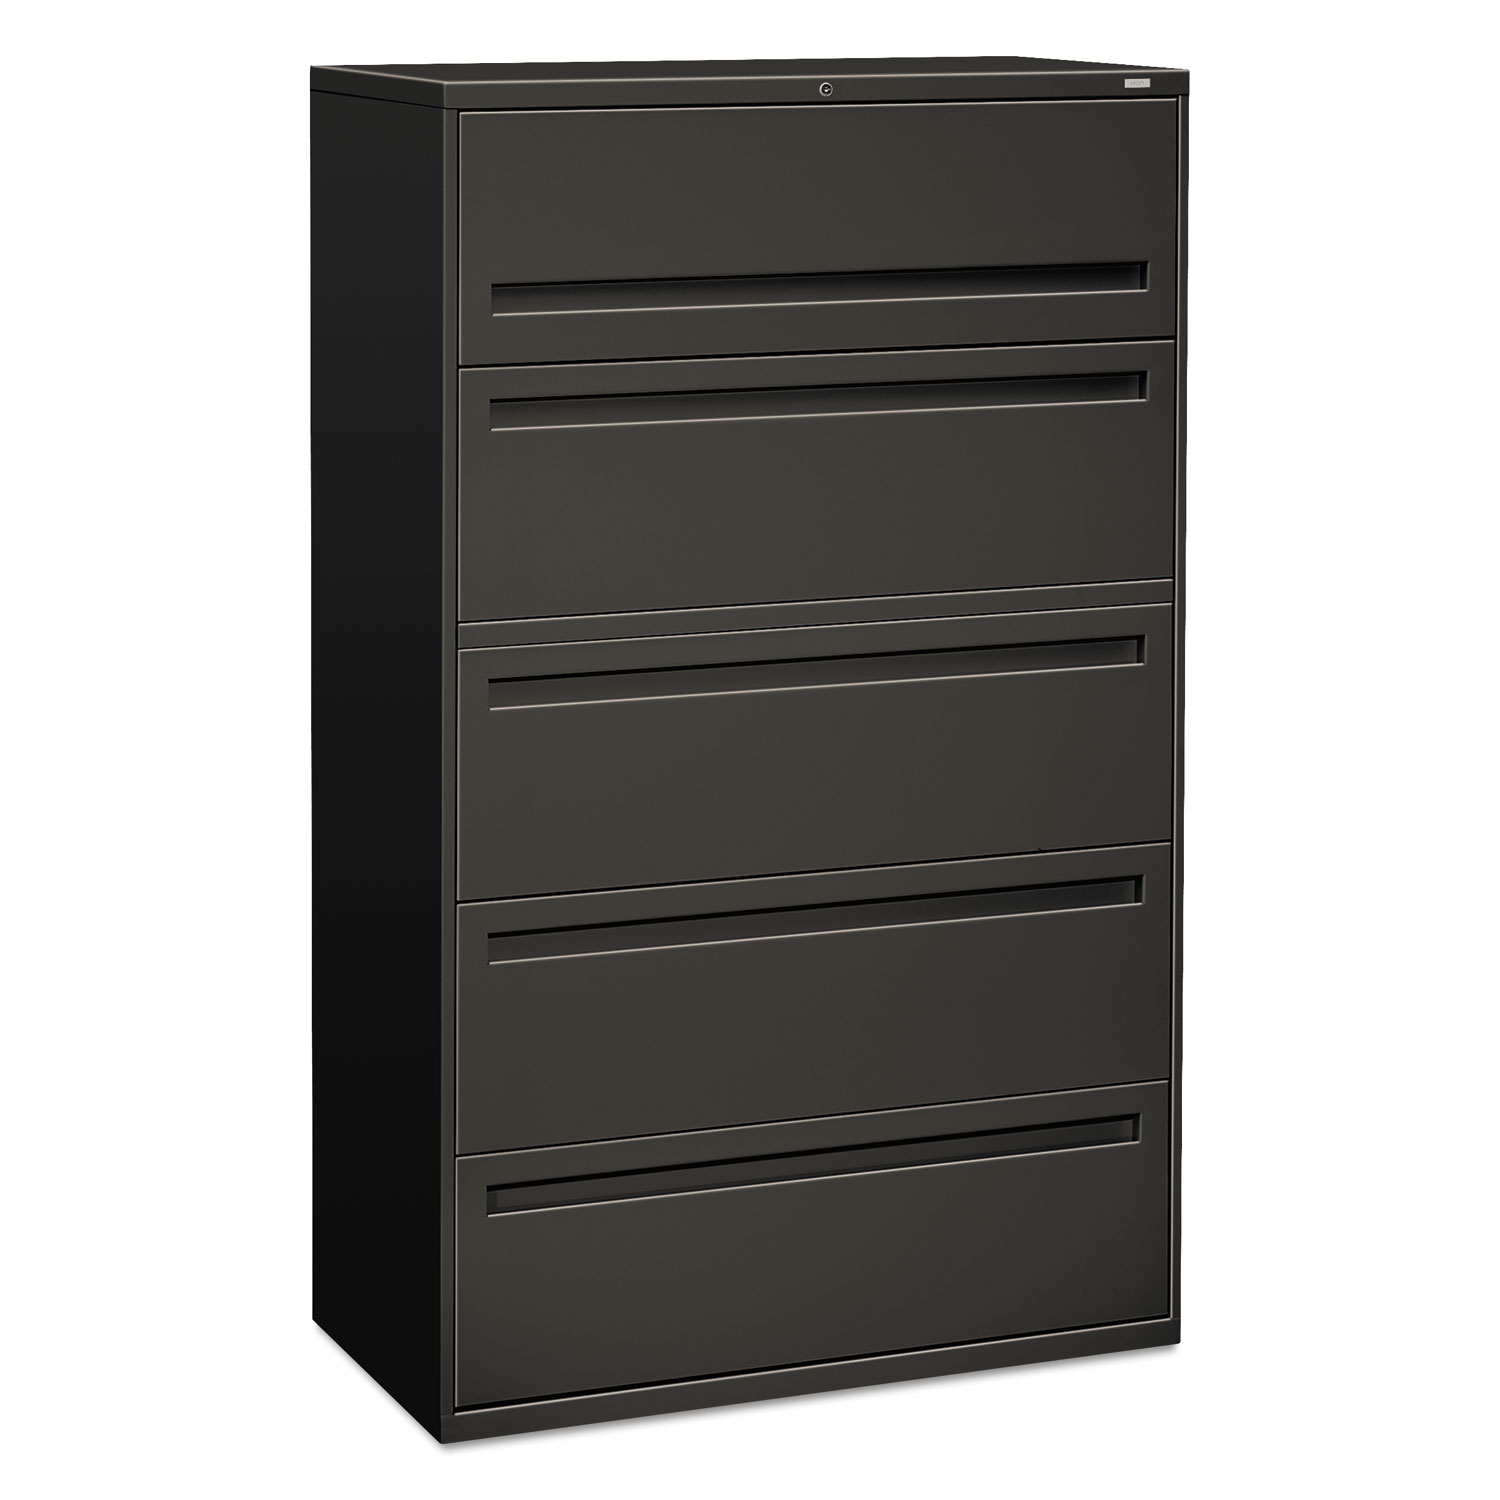  HON H795.L.S 700 Series Five-Drawer Lateral File with Roll-Out Shelves, 42w x 18d x 64.25h, Charcoal (HON795LS) 